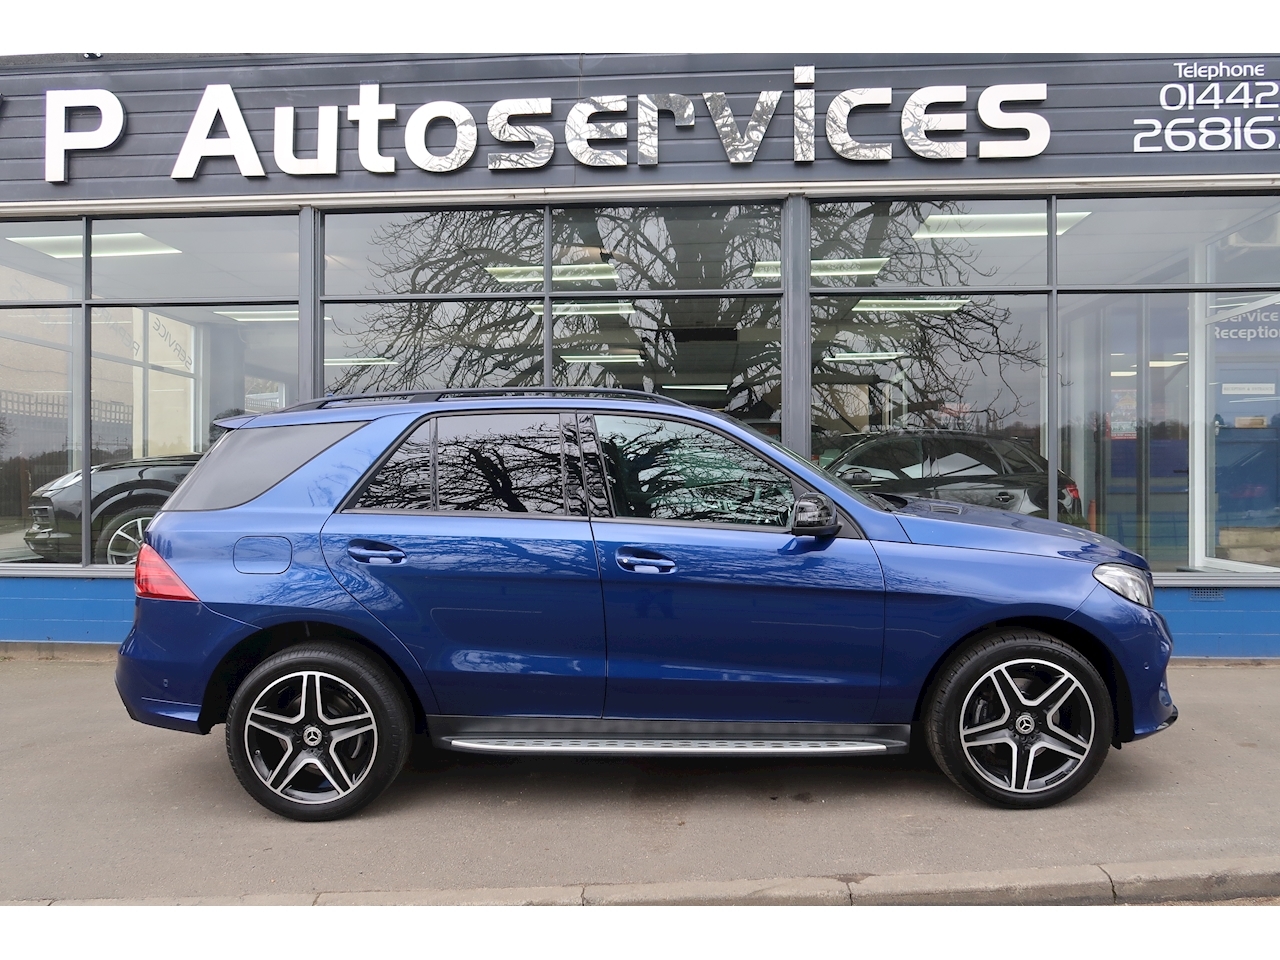 3.0 GLE350d V6 AMG Night Edition SUV 5dr Diesel G-Tronic 4MATIC (s/s) (258 ps)